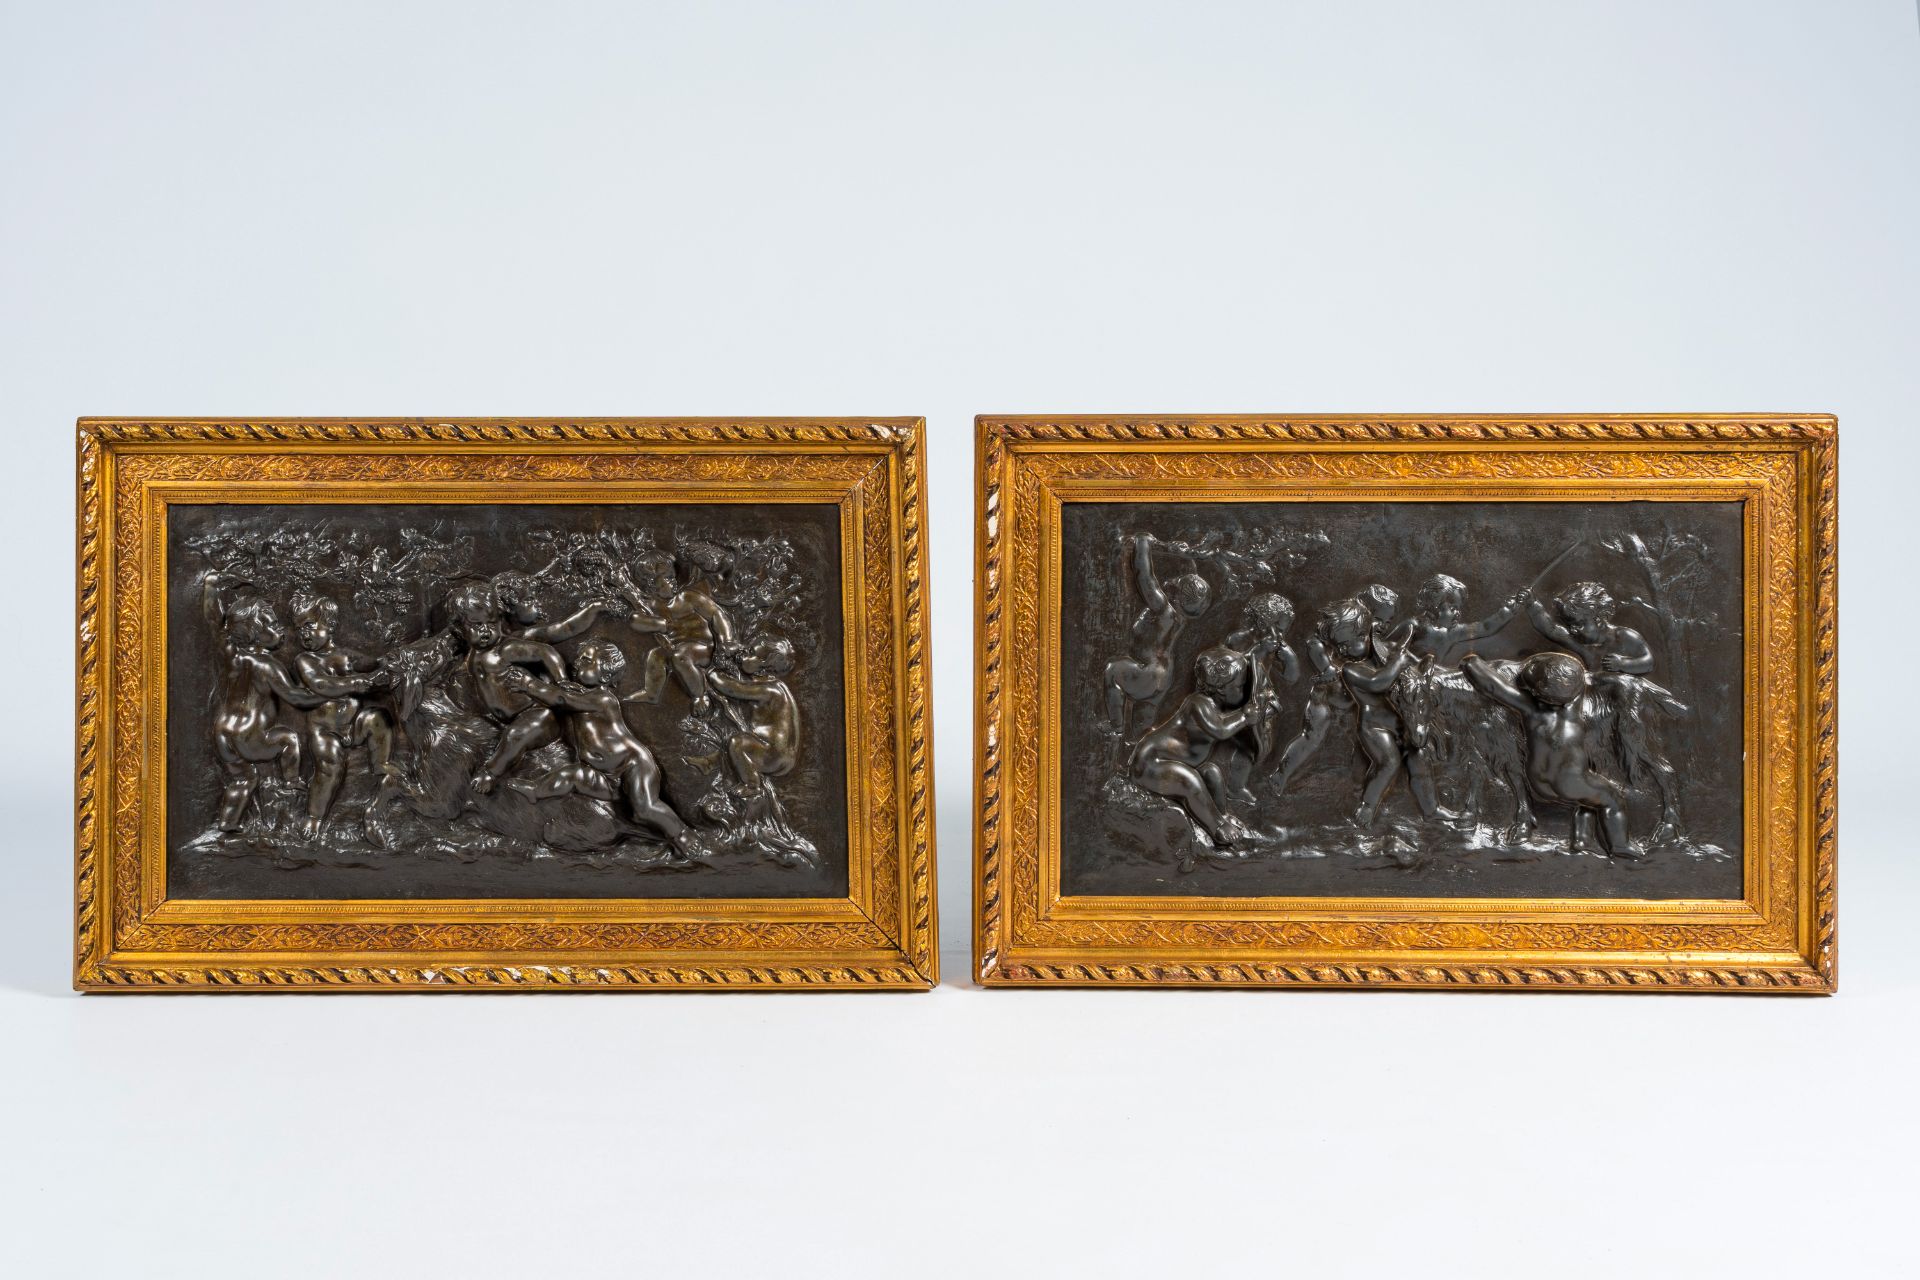 A pair of large French bronze patinated copper plaques with relief design of putti, goats and Bacchu